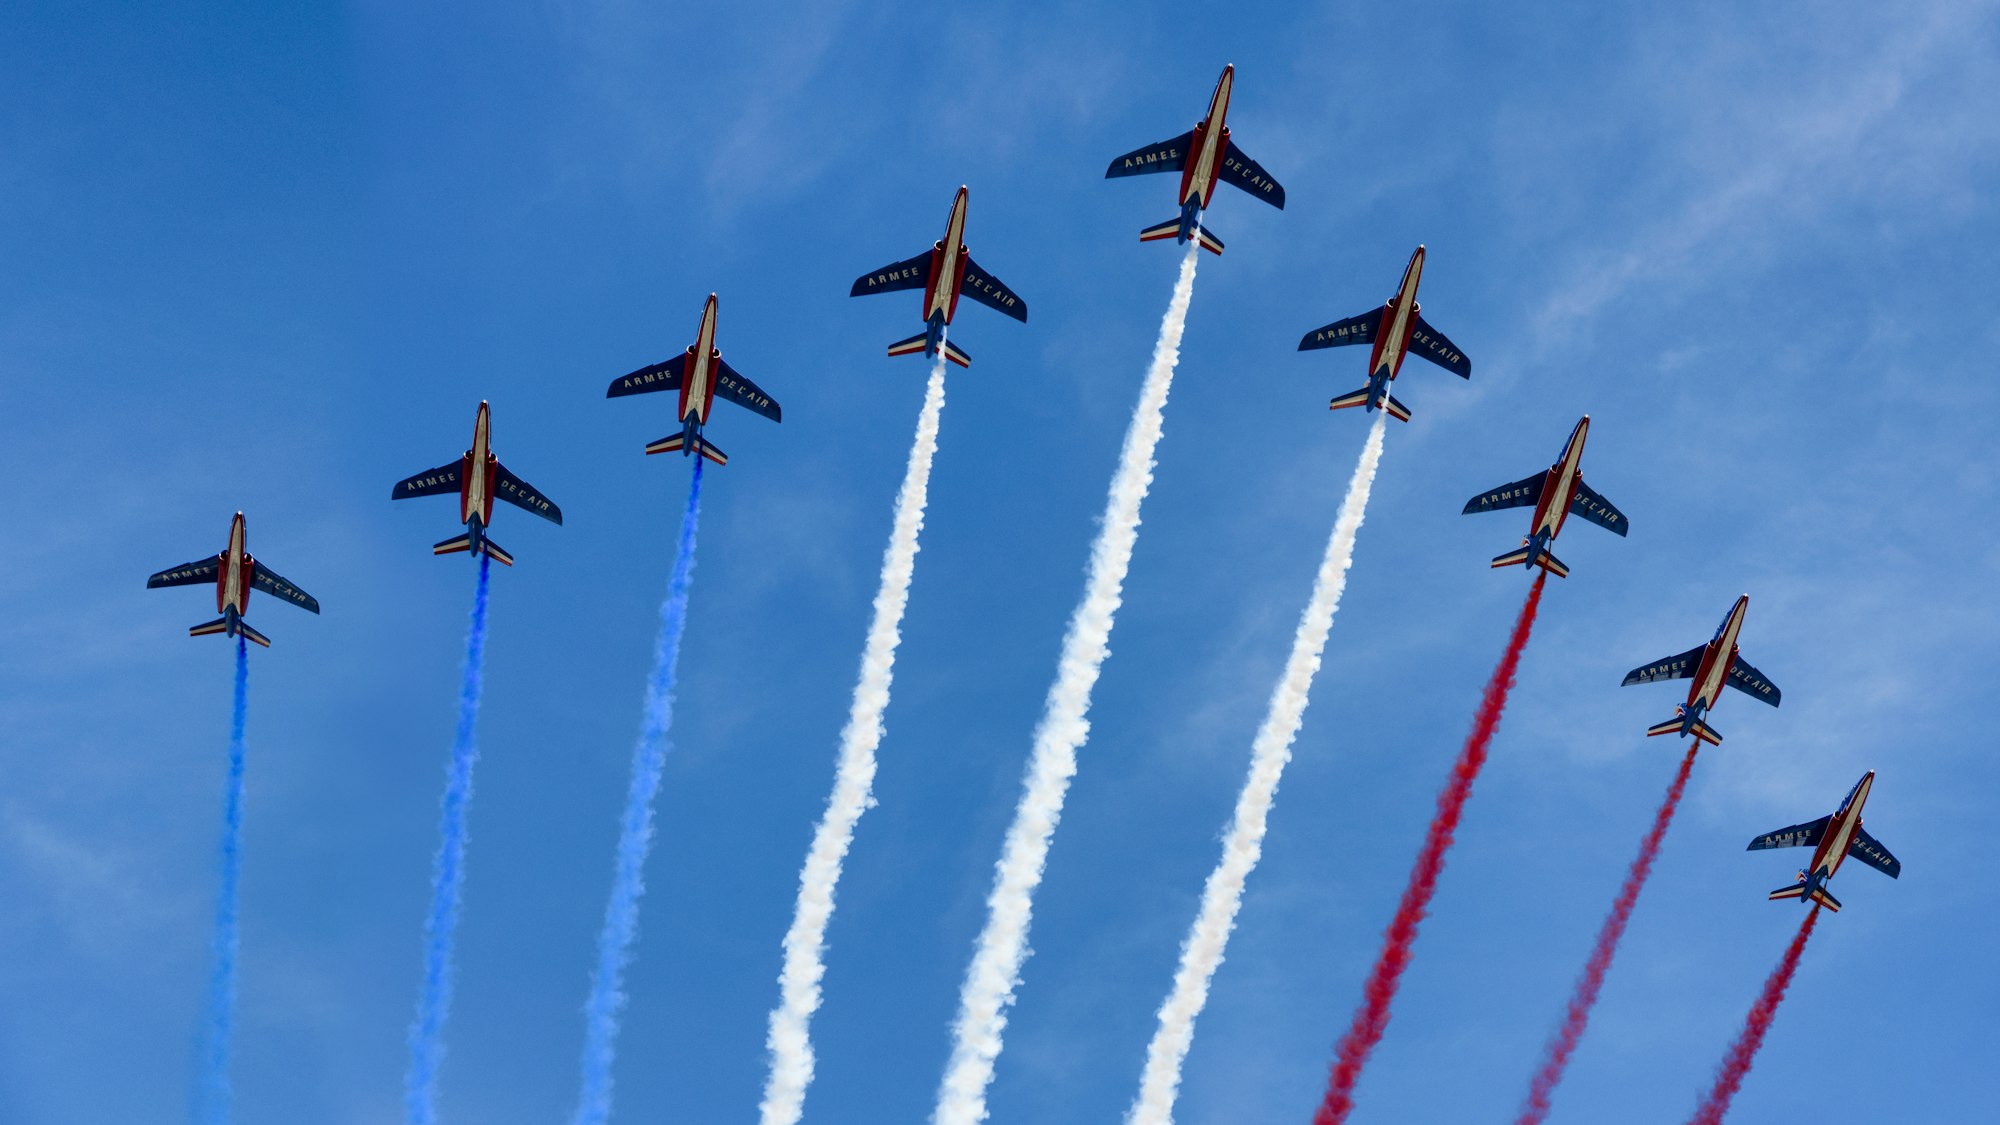 July 4th Parade…From the Perspectives of a Commercial & Recreational Pilot